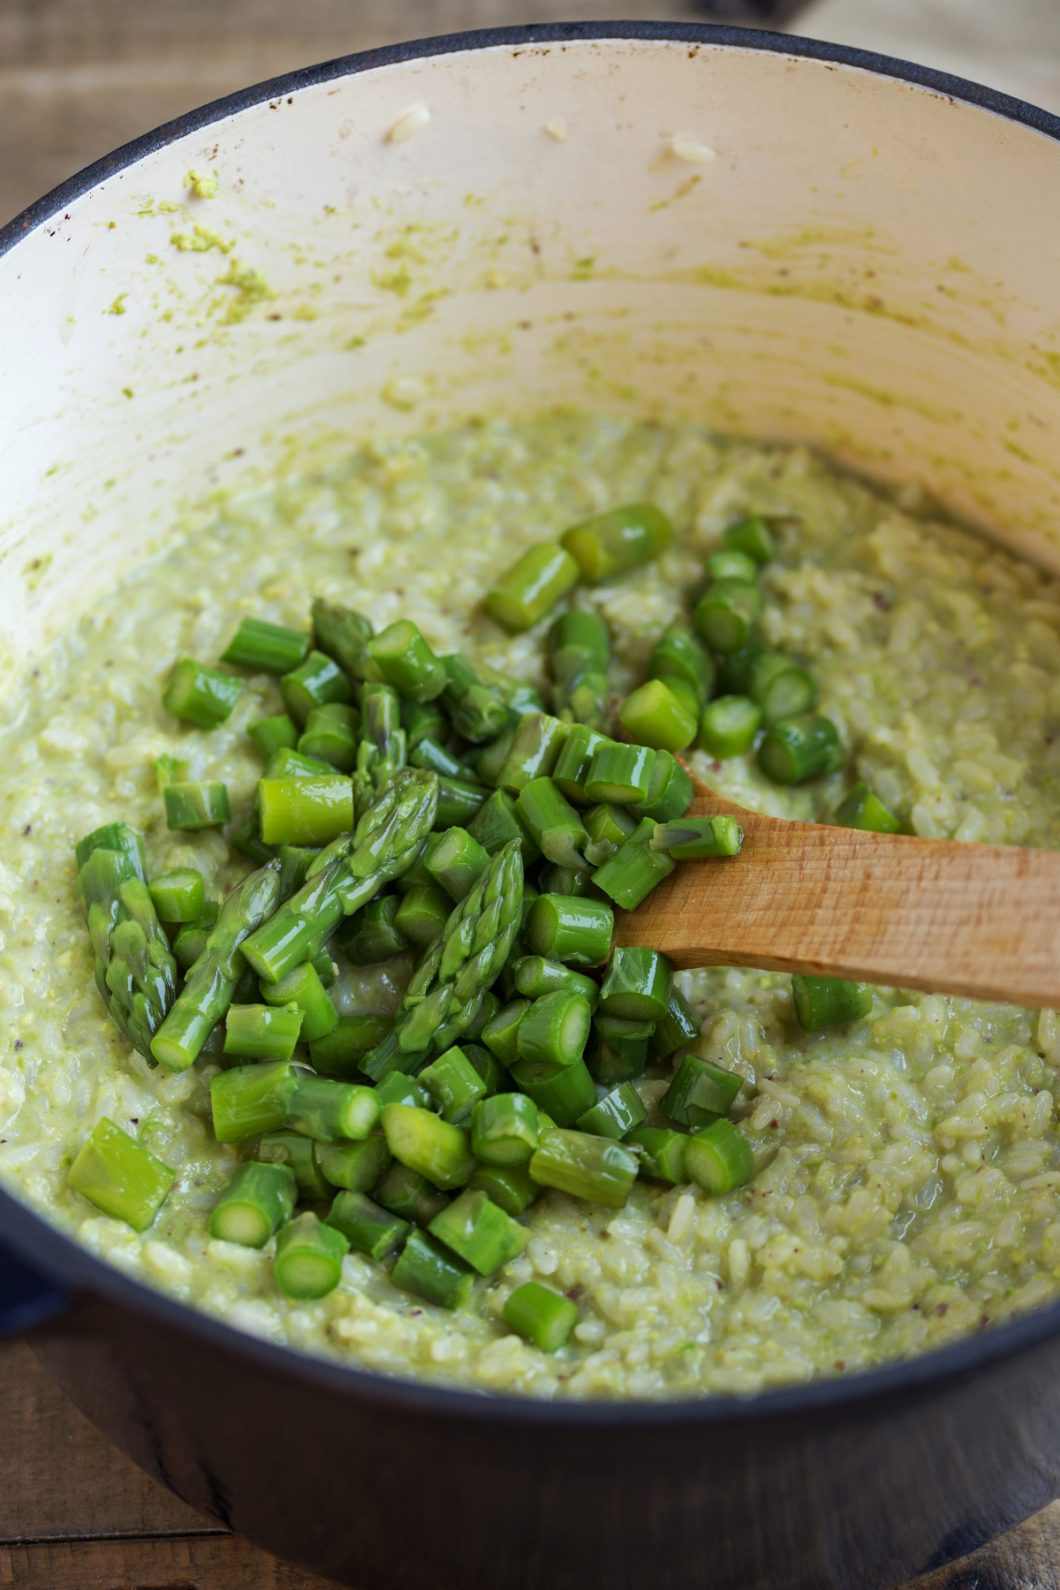 Chopped asparagus added to the risotto pot.